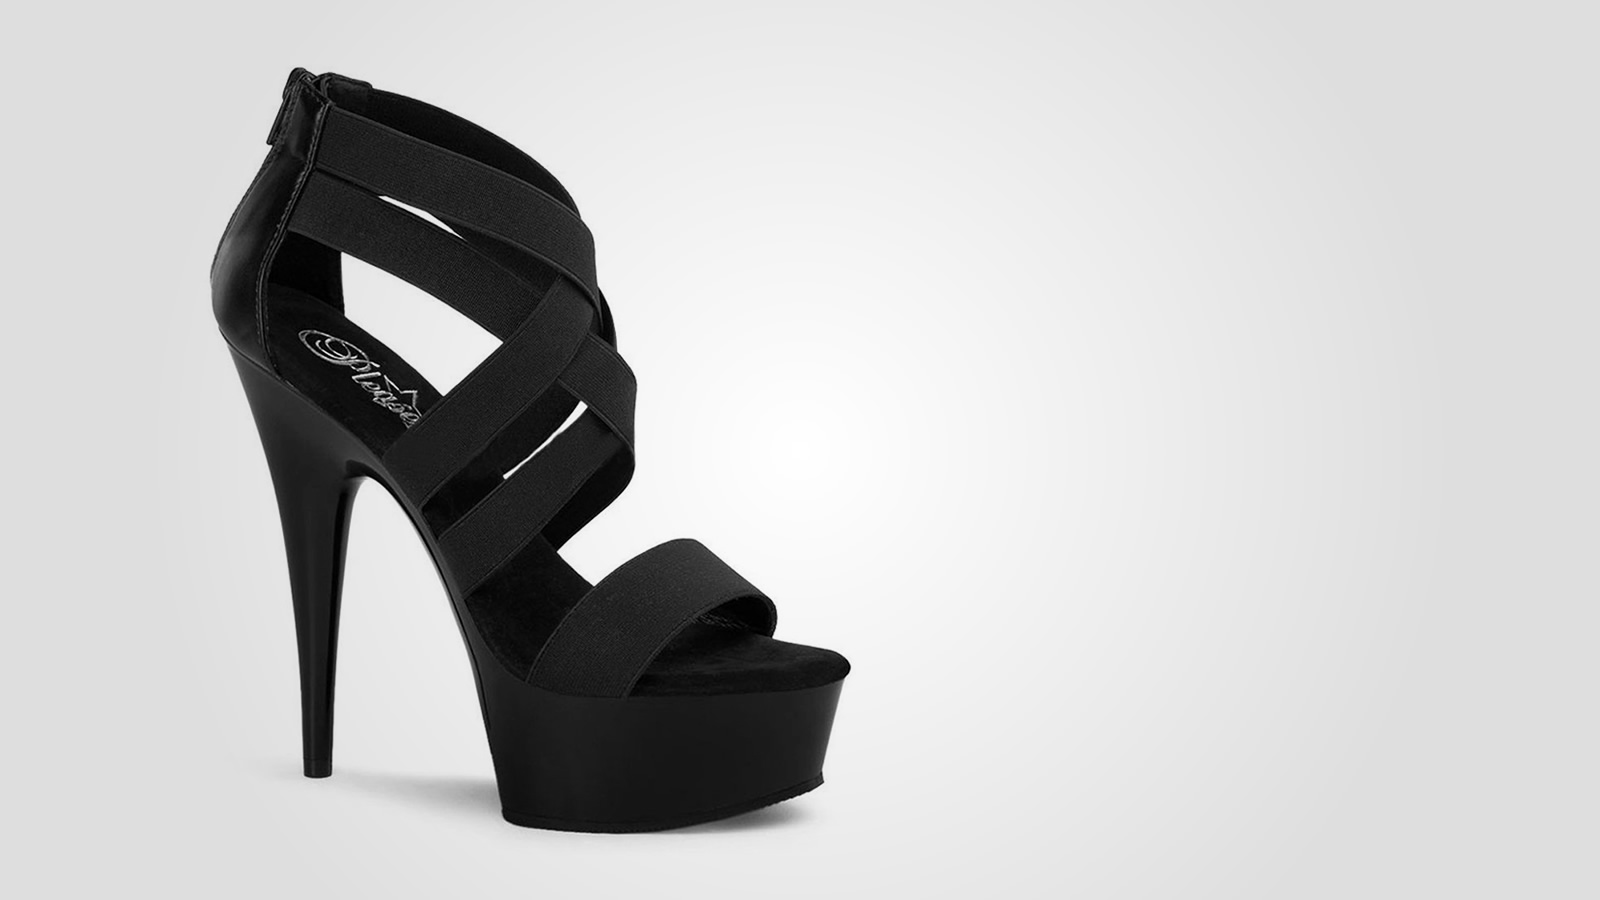 A strappy high-heeled shoe